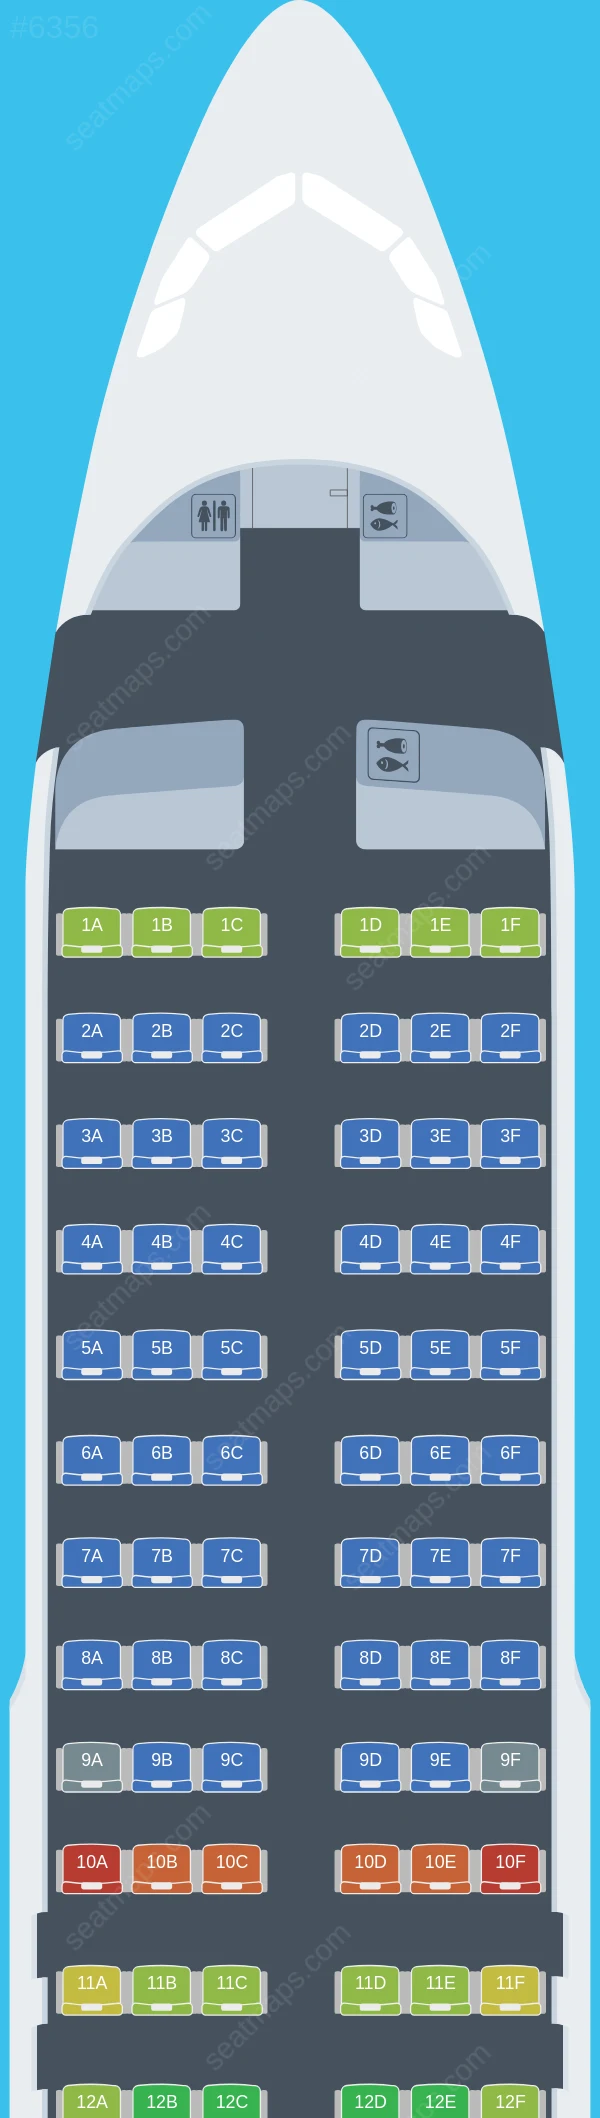 Aegean Airlines Airbus A320-200 seatmap preview